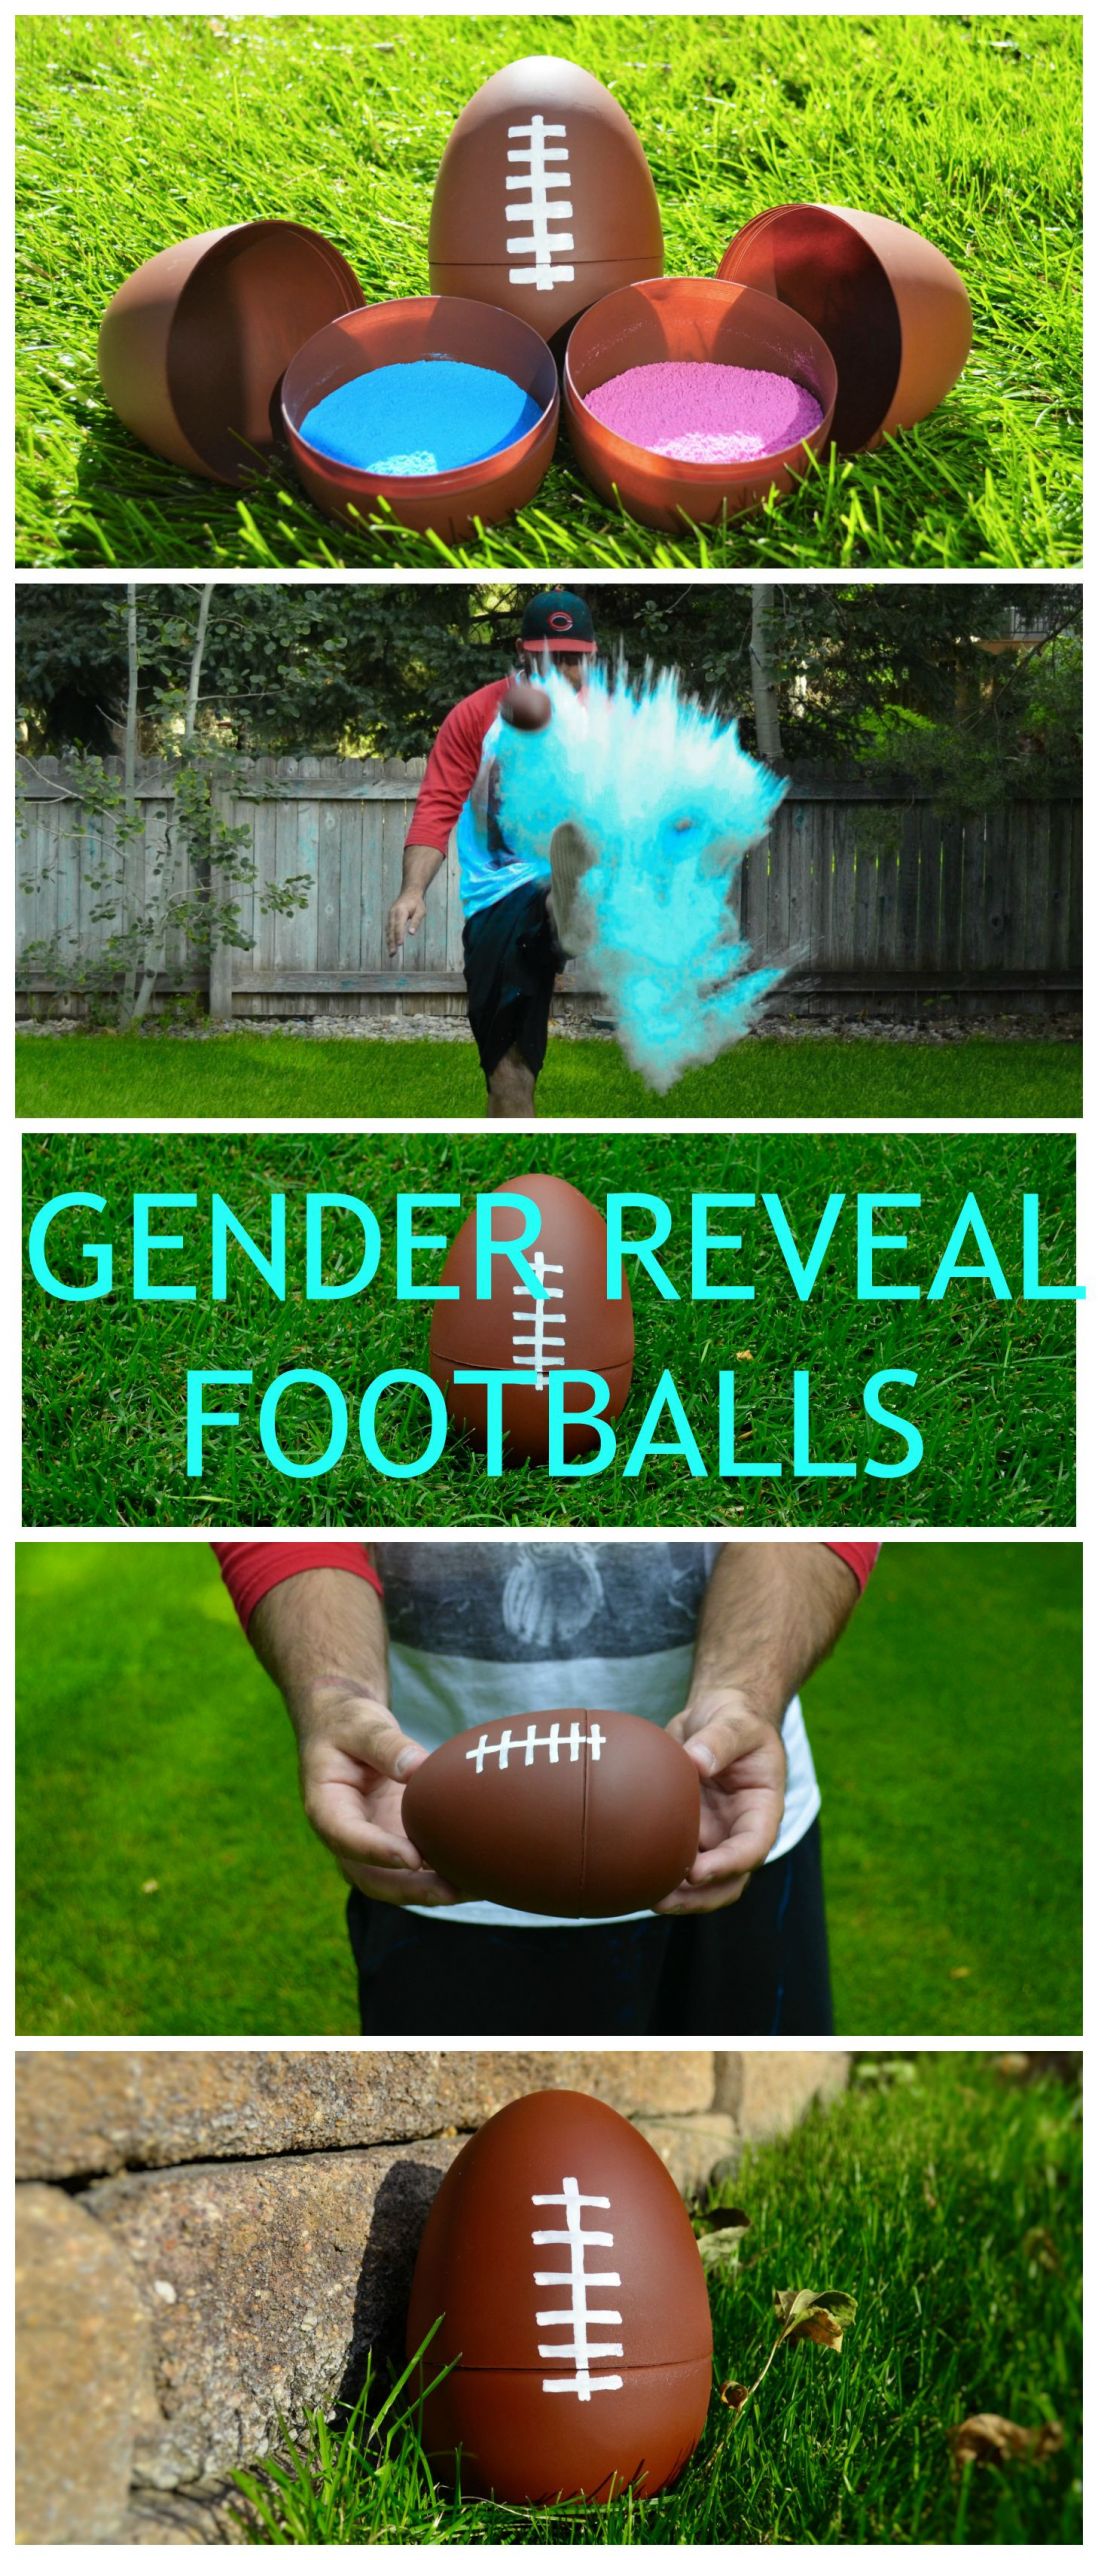 Football Gender Reveal Party Ideas
 Football NEW DESIGN Gender Reveal balls with NEW bright